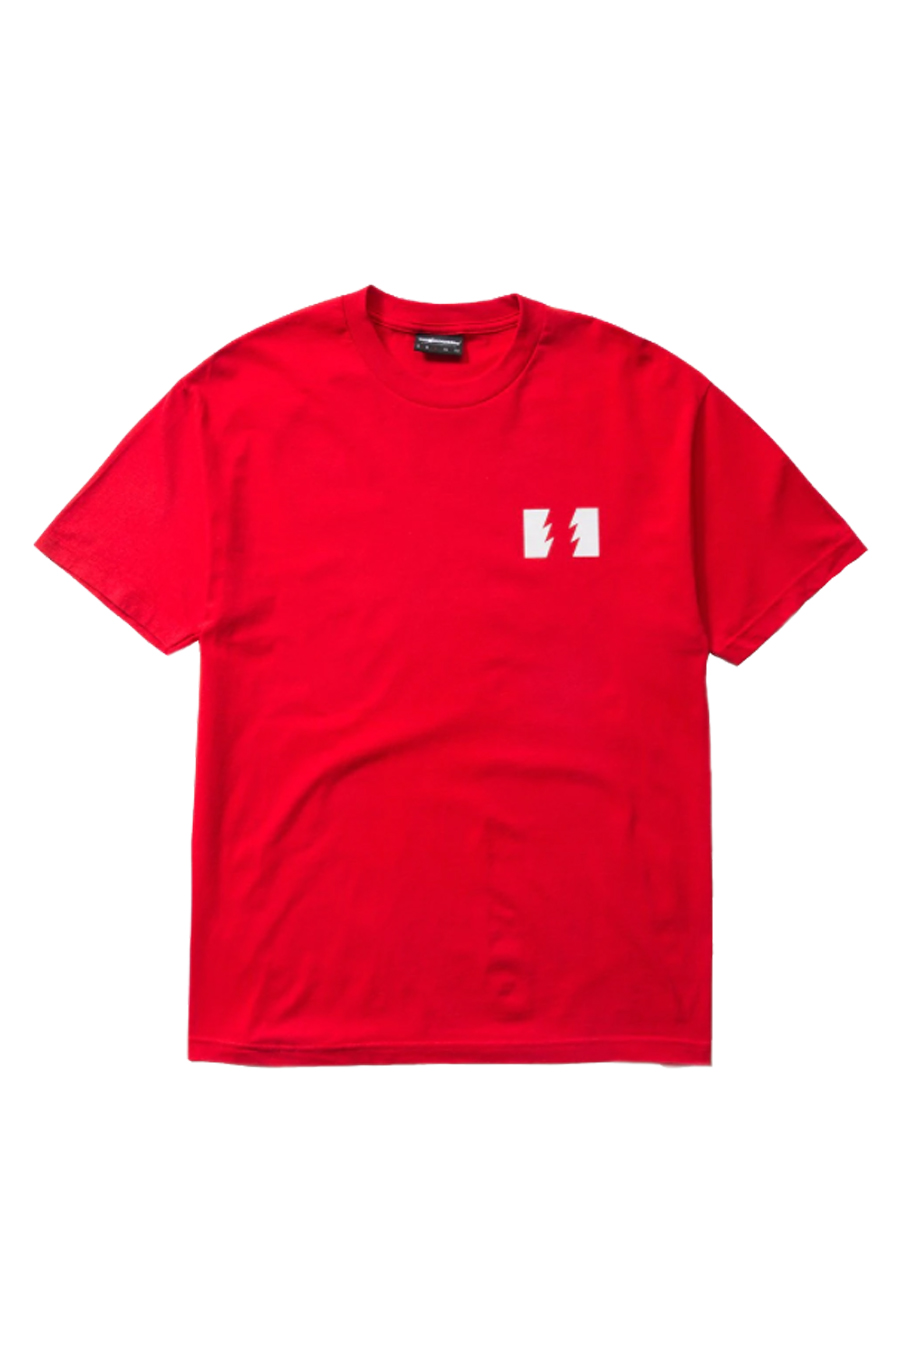 THE HUNDREDS T-Shirts Forever Wildfire - RED-HUNF19P101004FOREVER-RED 57360